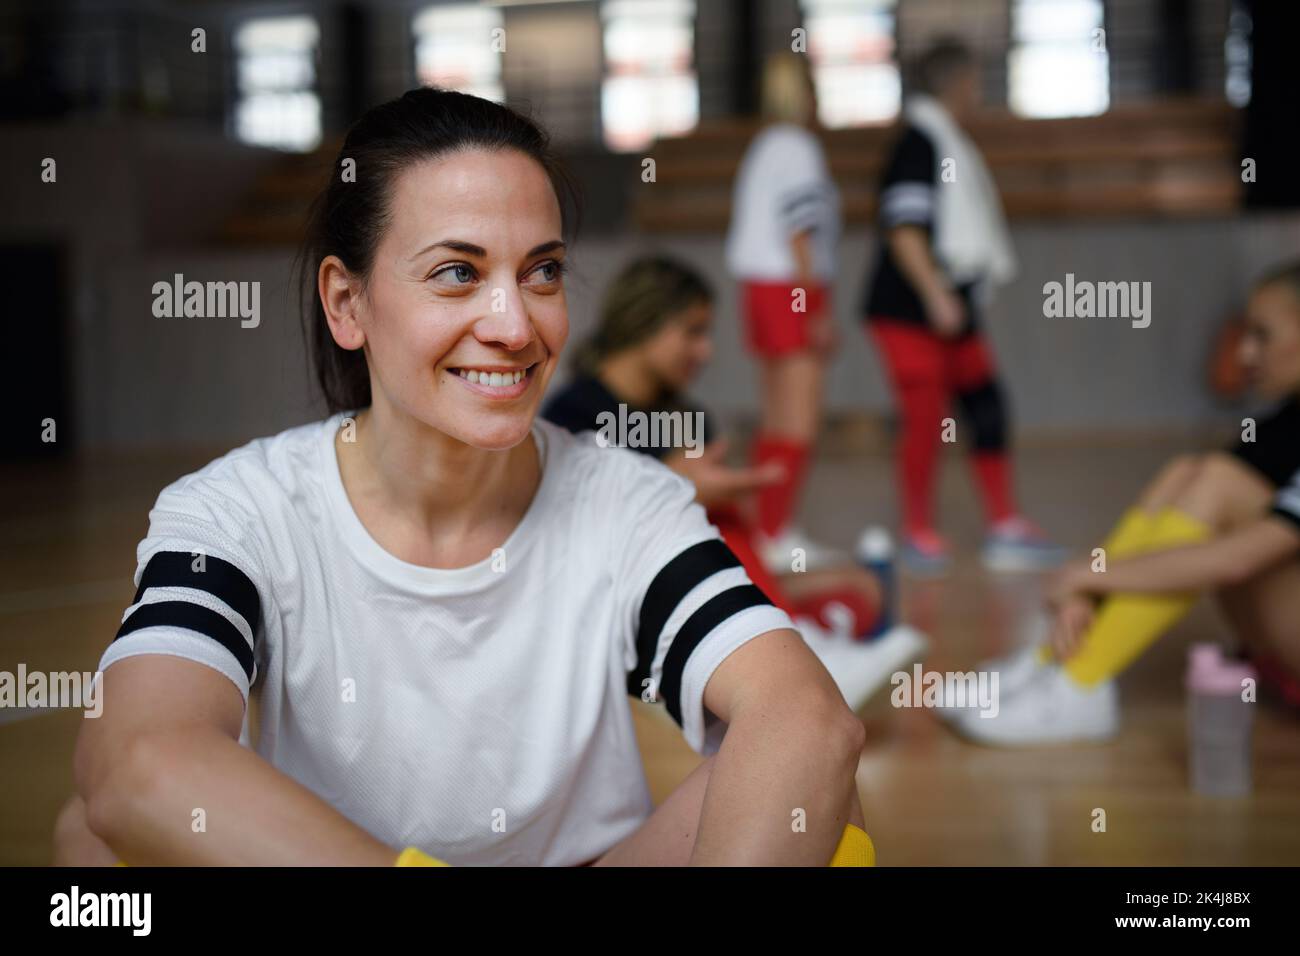 Group of young and old women, sports team players in gym sitting and resting after match. Stock Photo